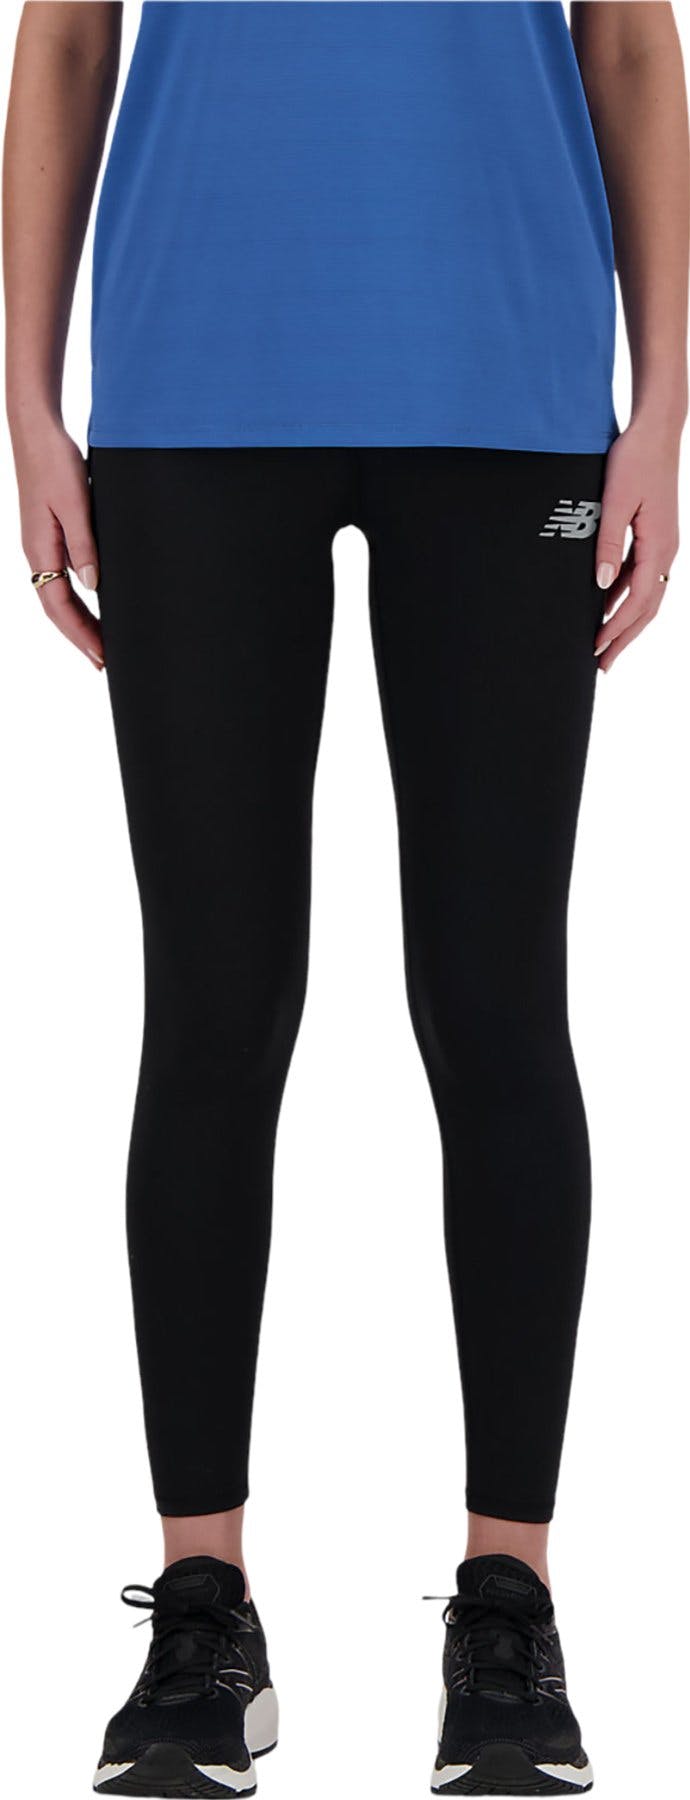 Product image for Shape Shield 7/8 High Rise Pocket Tights - Women's